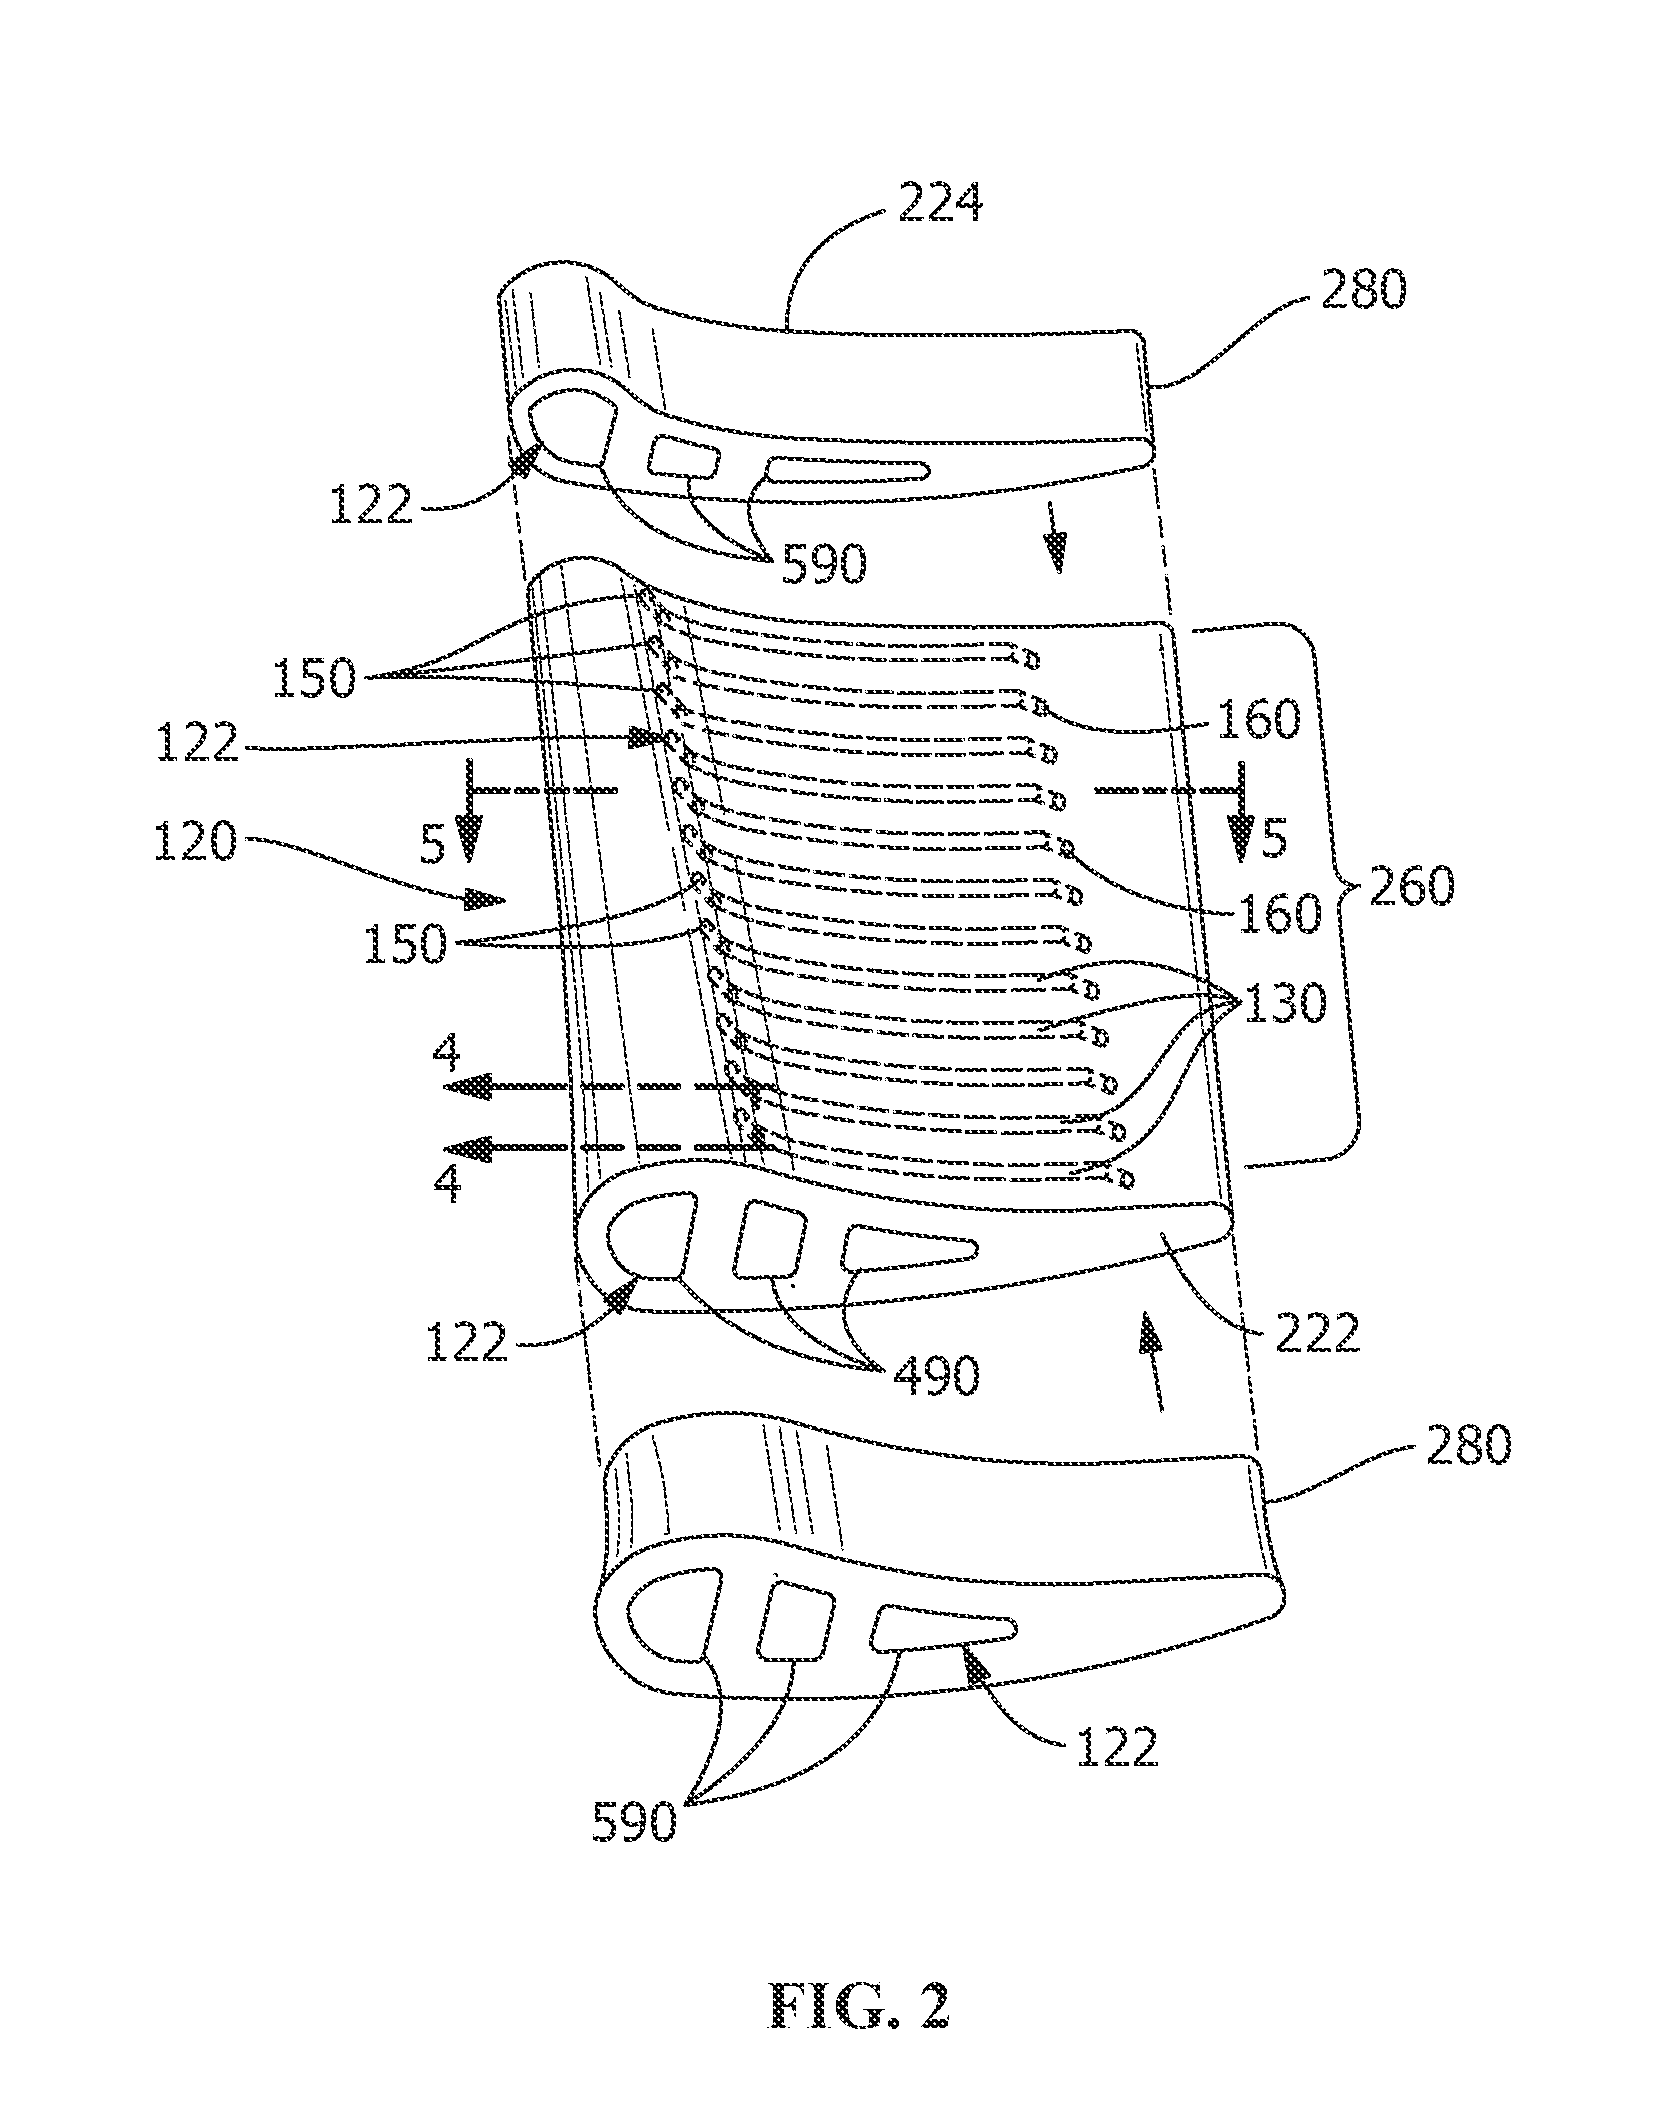 Method of manufacturing a component and thermal management process